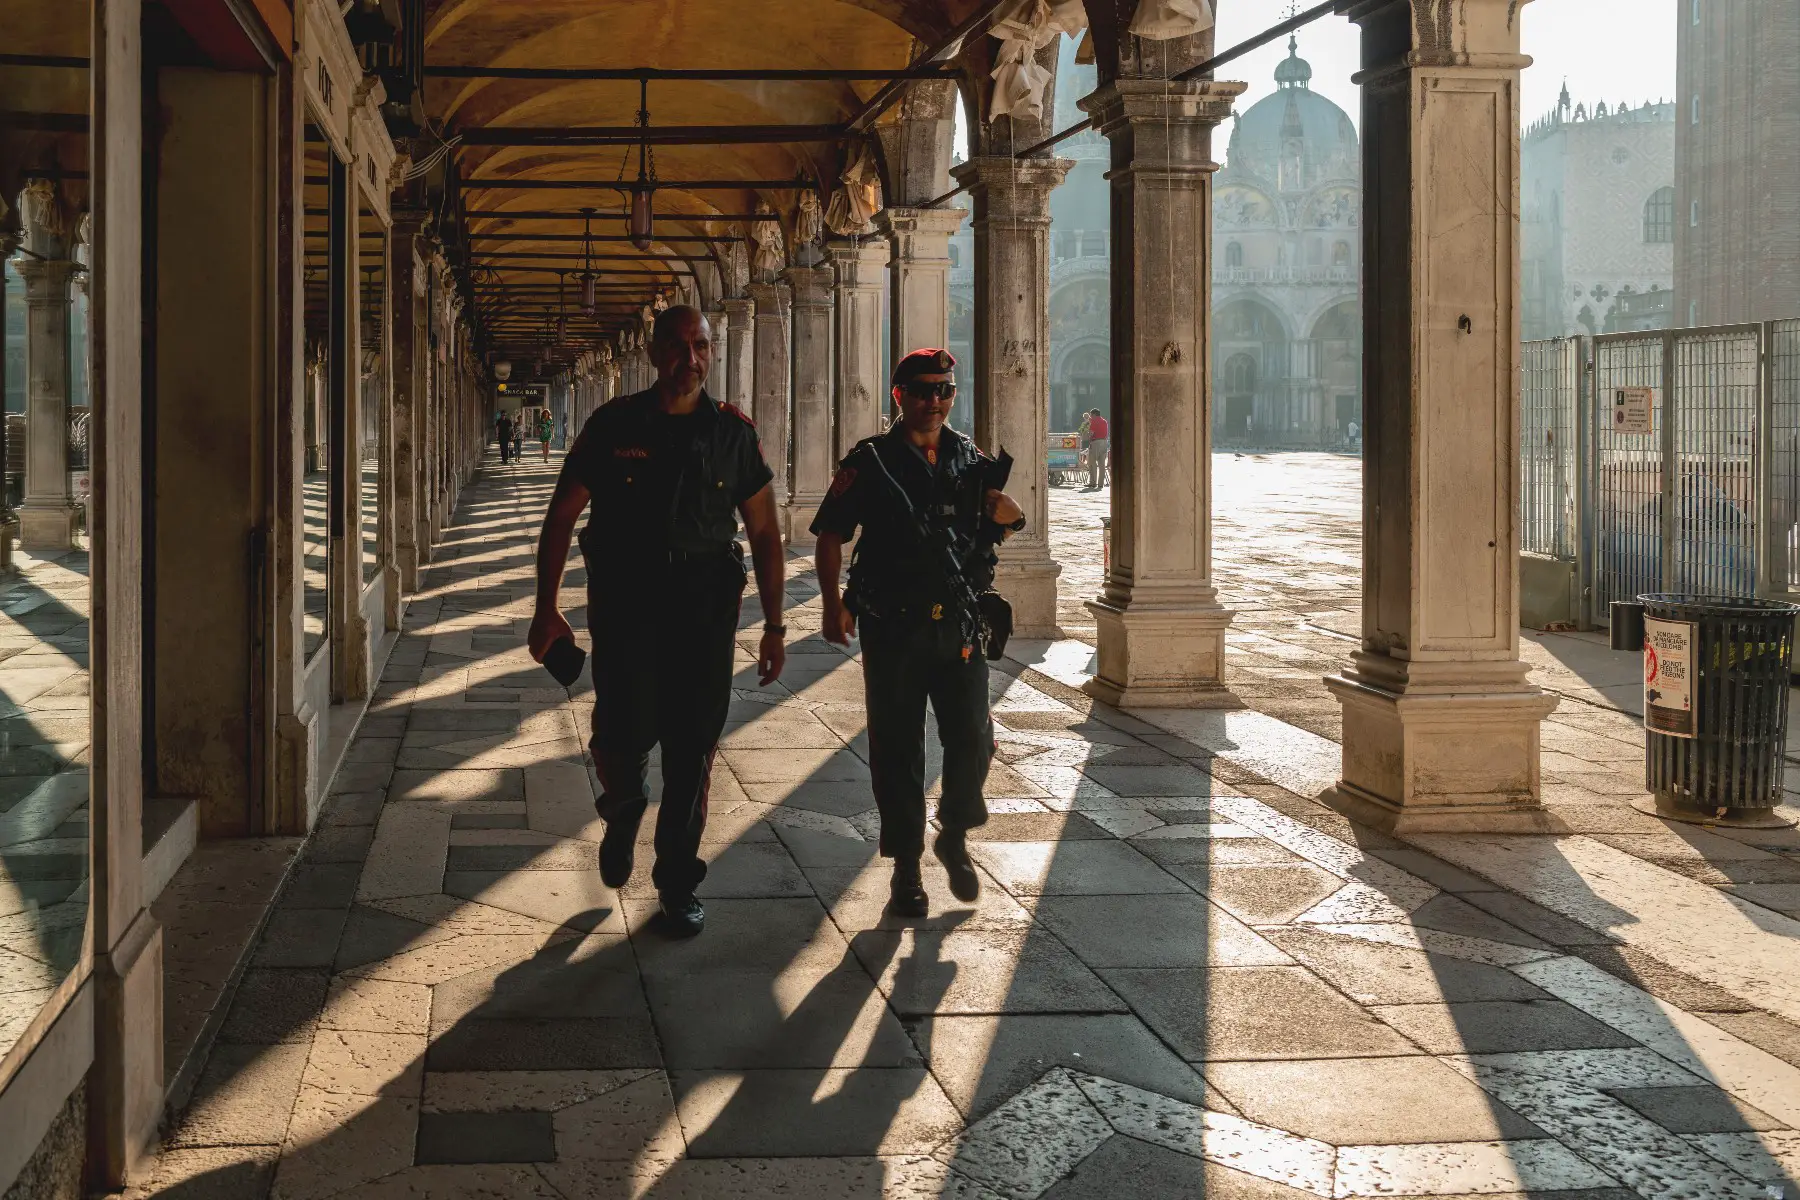 Two police officers walking at the Piazza San Marco (St. Mark's Square) in Venice, Italy.